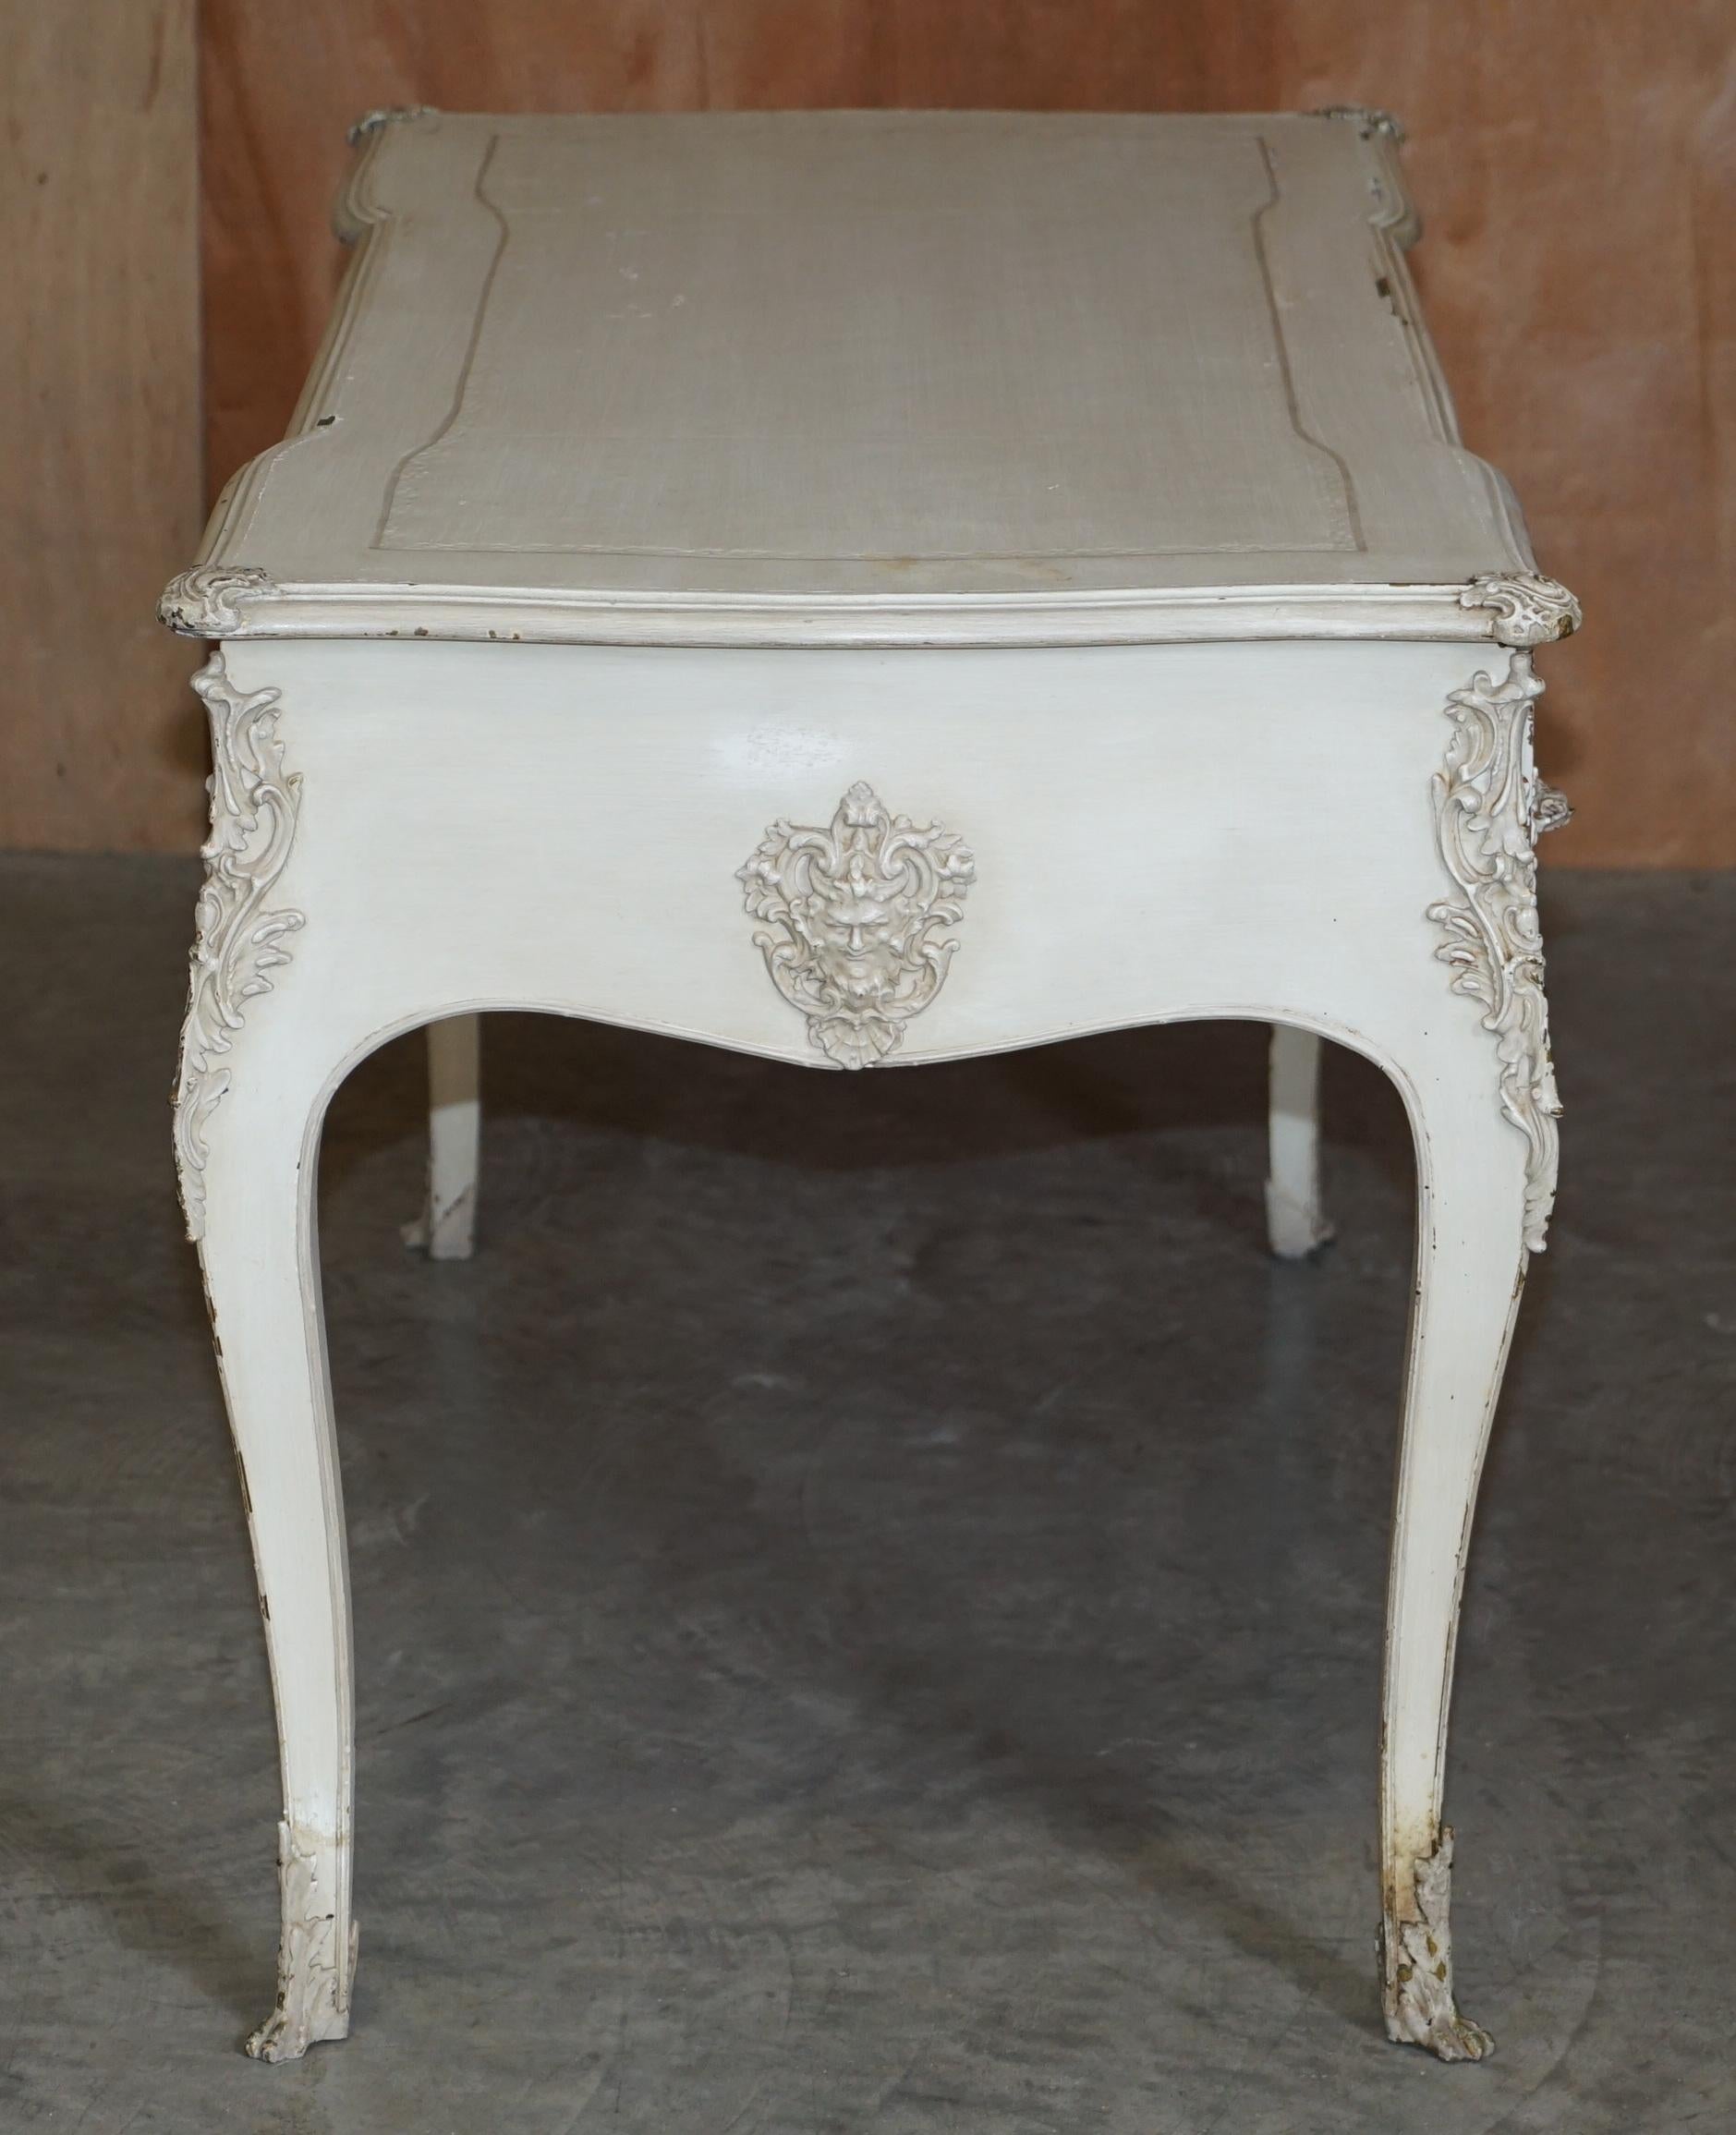 Early Paint Antique French Louis XV Style Bureau Plat Writing Desk & Stool For Sale 1